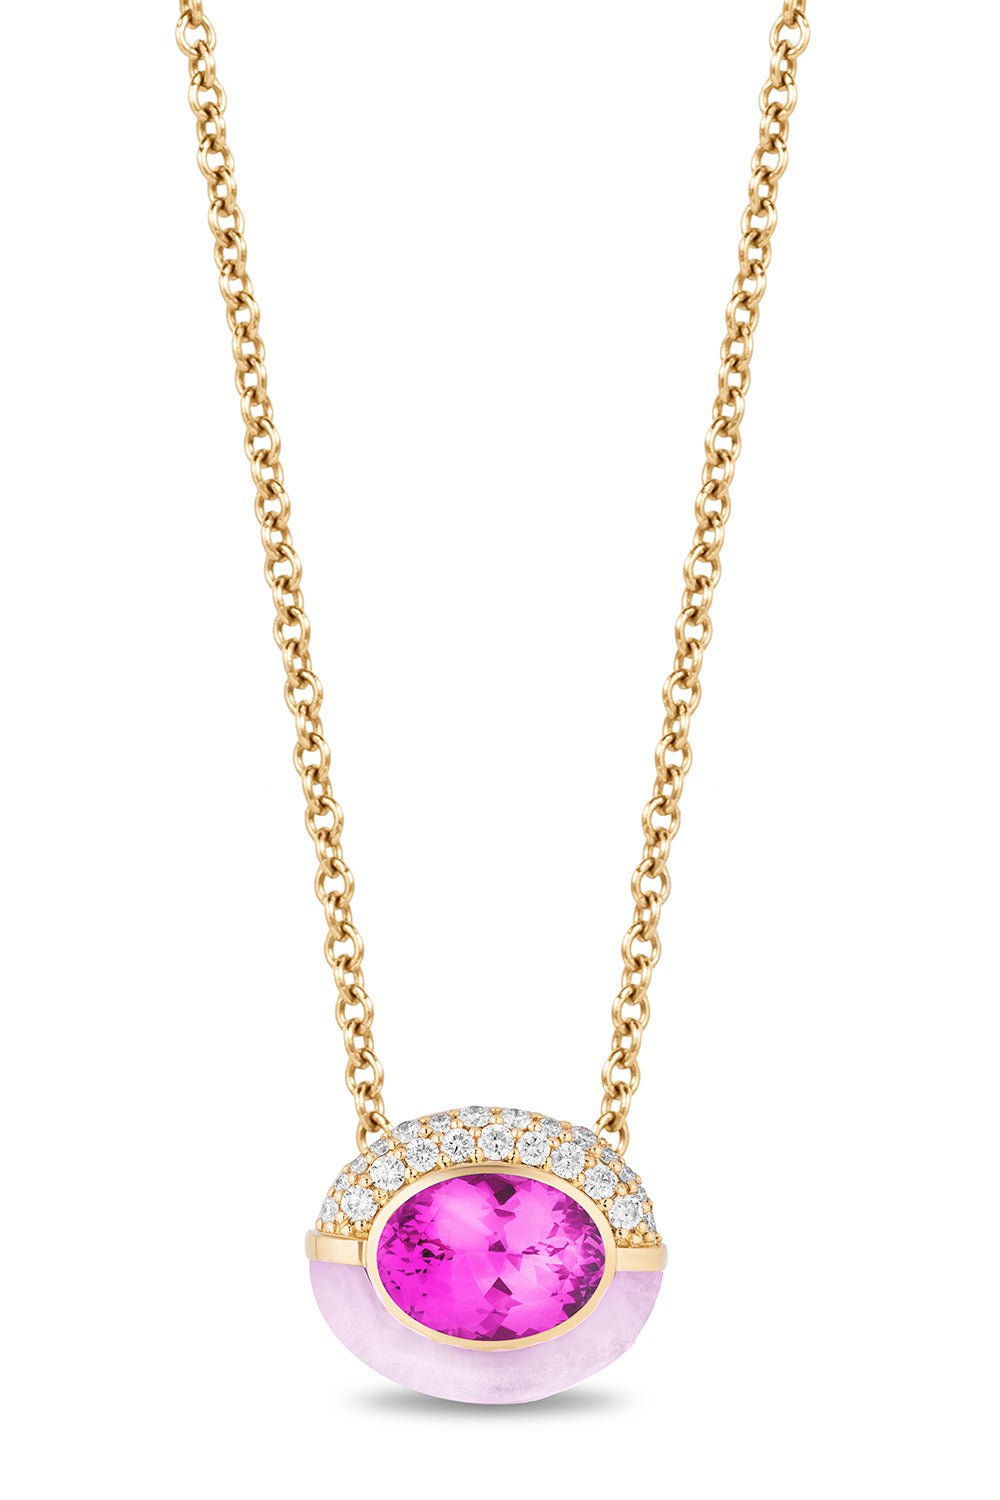 MASON & BOOKS-Purple Opal Sugar And Spice Oval Necklace-YELLOW GOLD